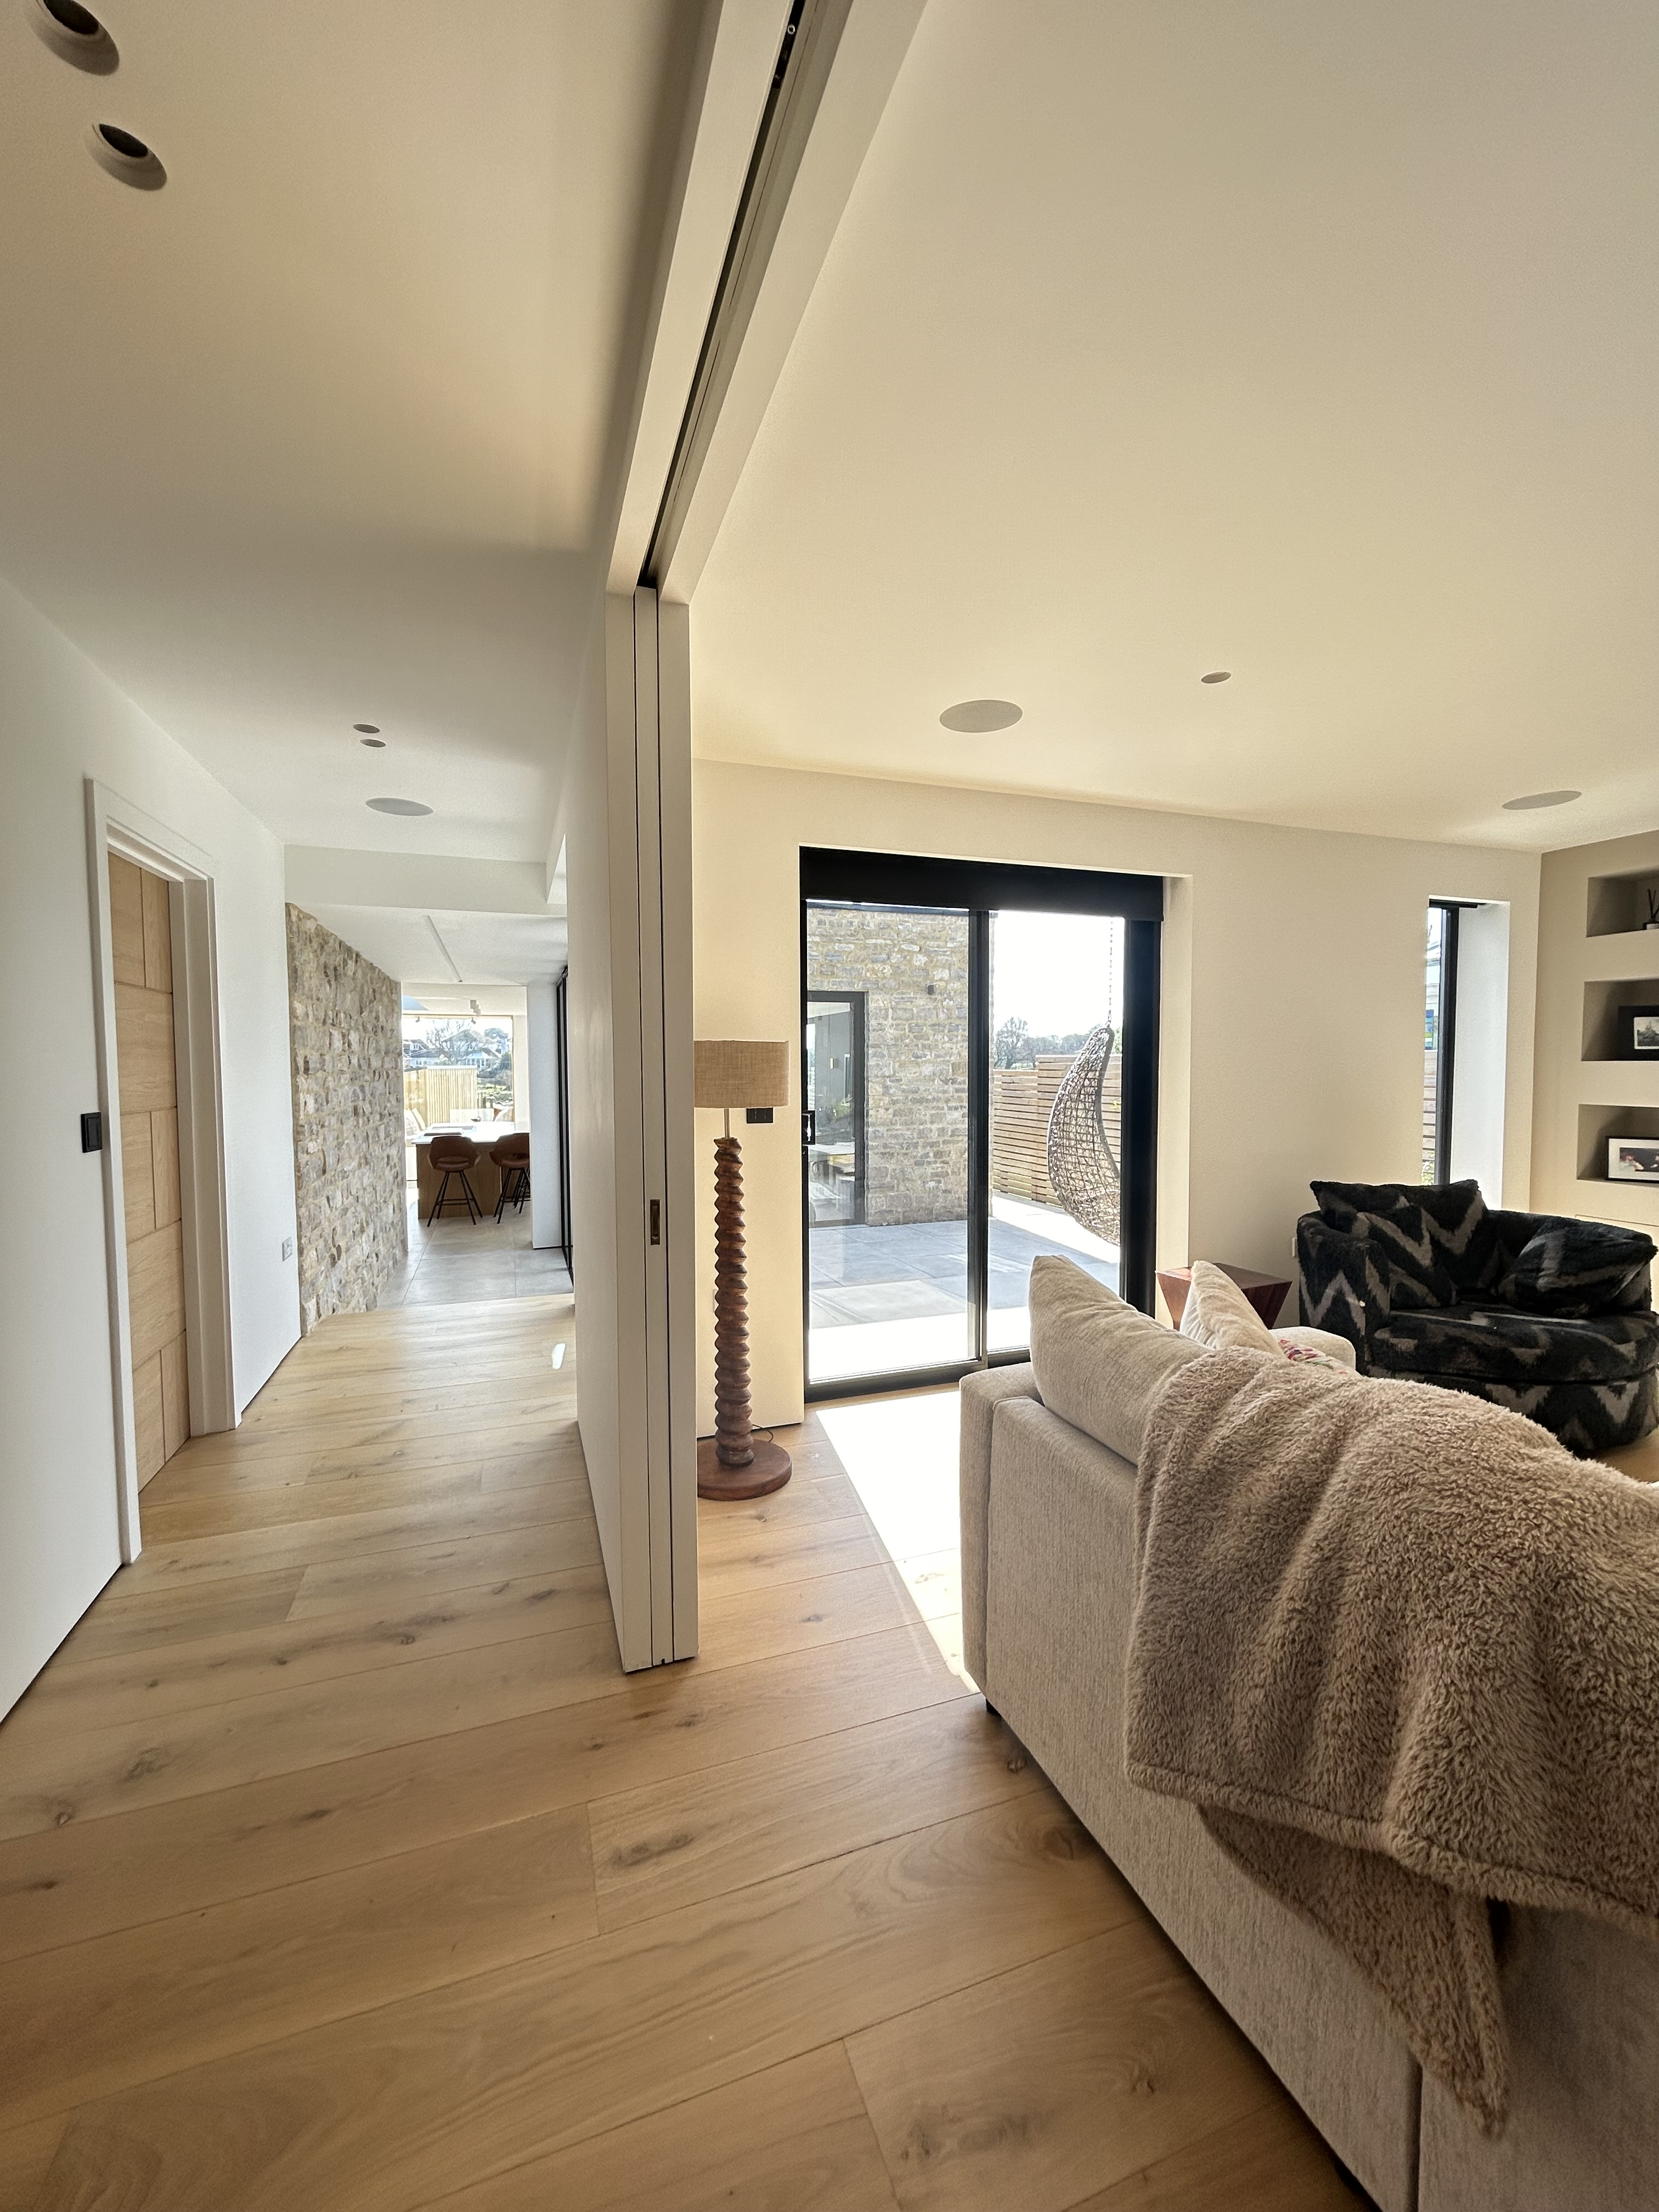 Property Image 2 - New Property, a luxurious new home in Bosham 